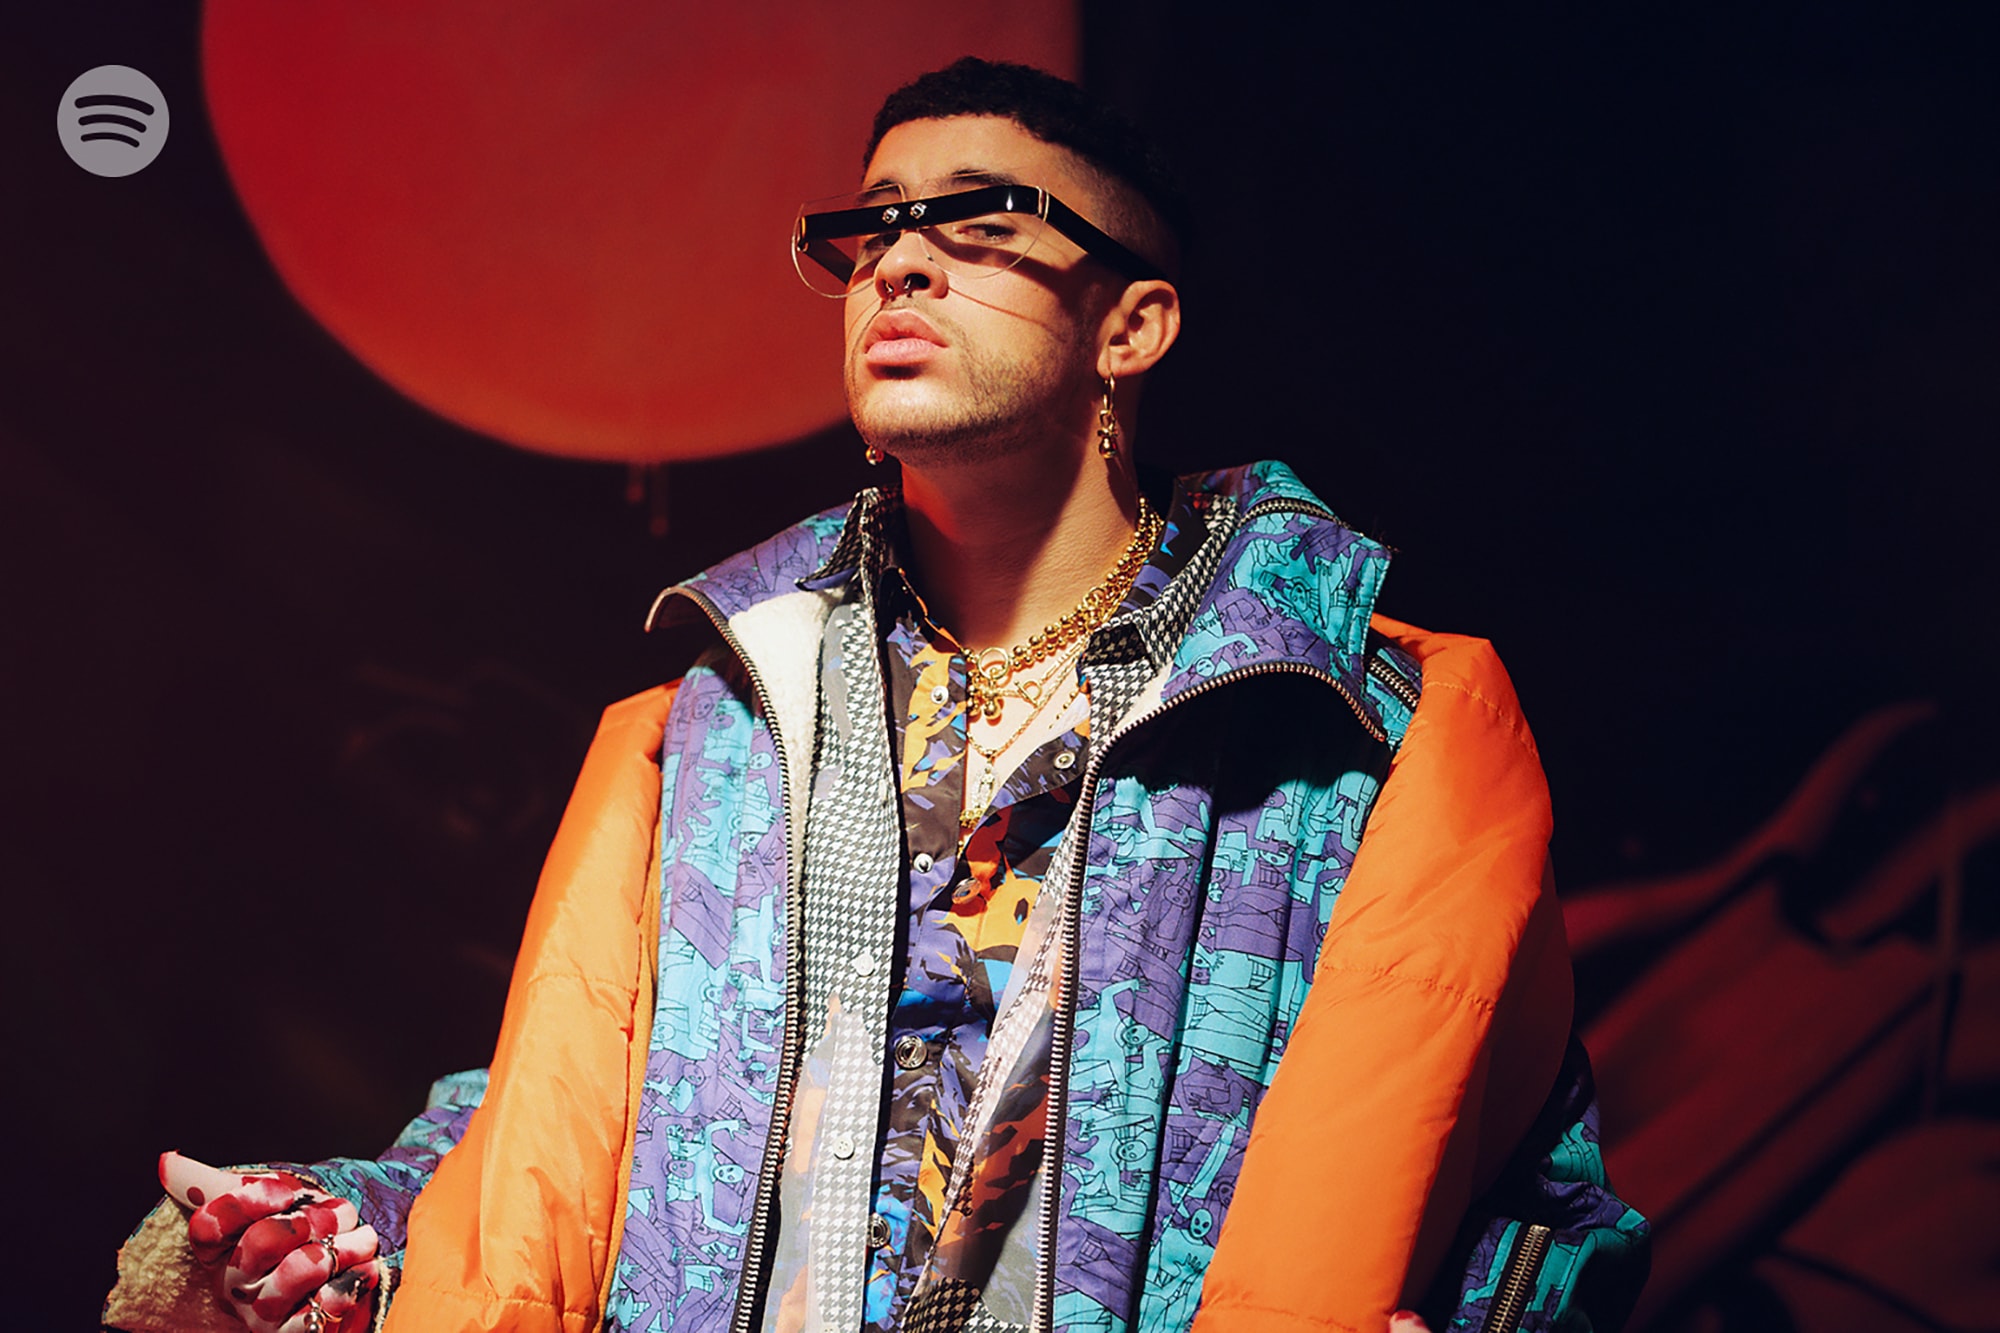 Bad Bunny Announces New Album 'YHLQMDLG' Release Date Country Rap Trap Puerto Rico Jimmy Fallon Music Video Performance Listen Watch New Music Best New Tracks HYPEBEAST 